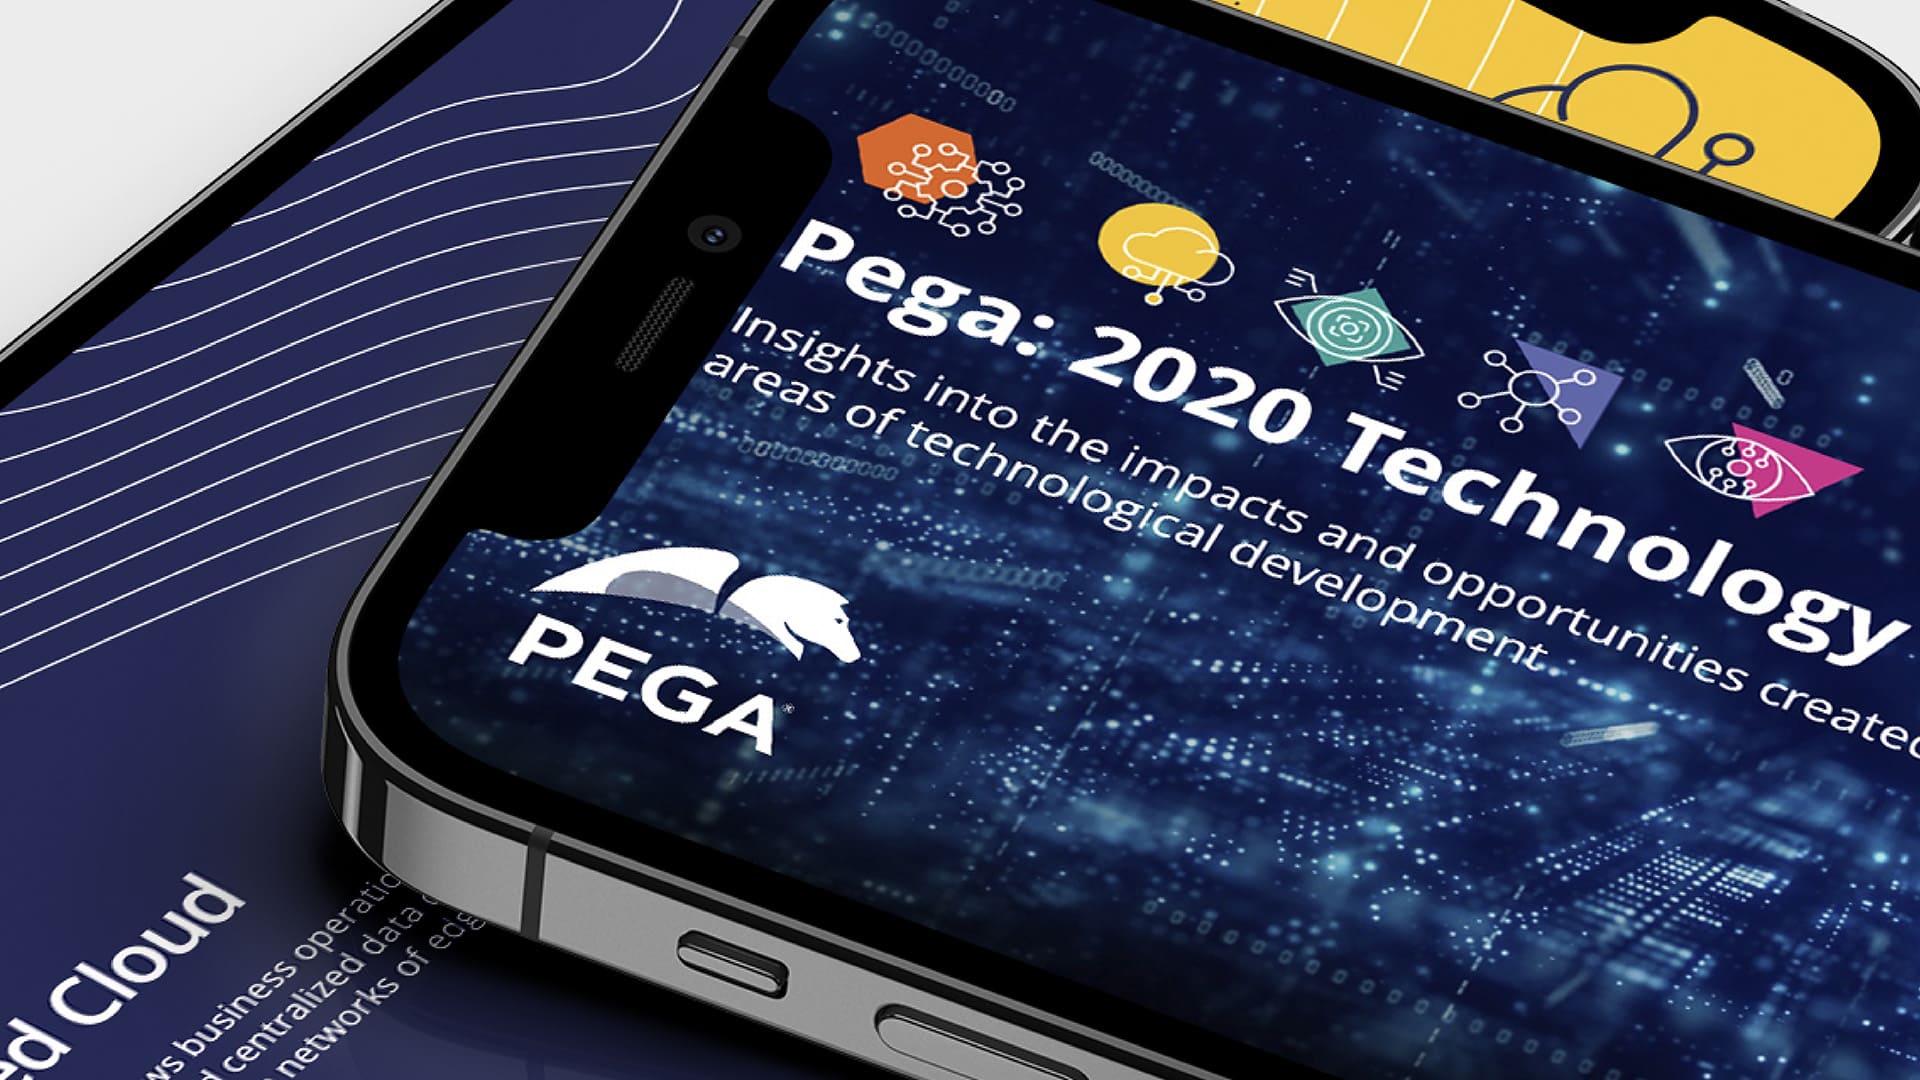 Two mobile phones displaying the Pega Tech Trends 2020 Report Cover